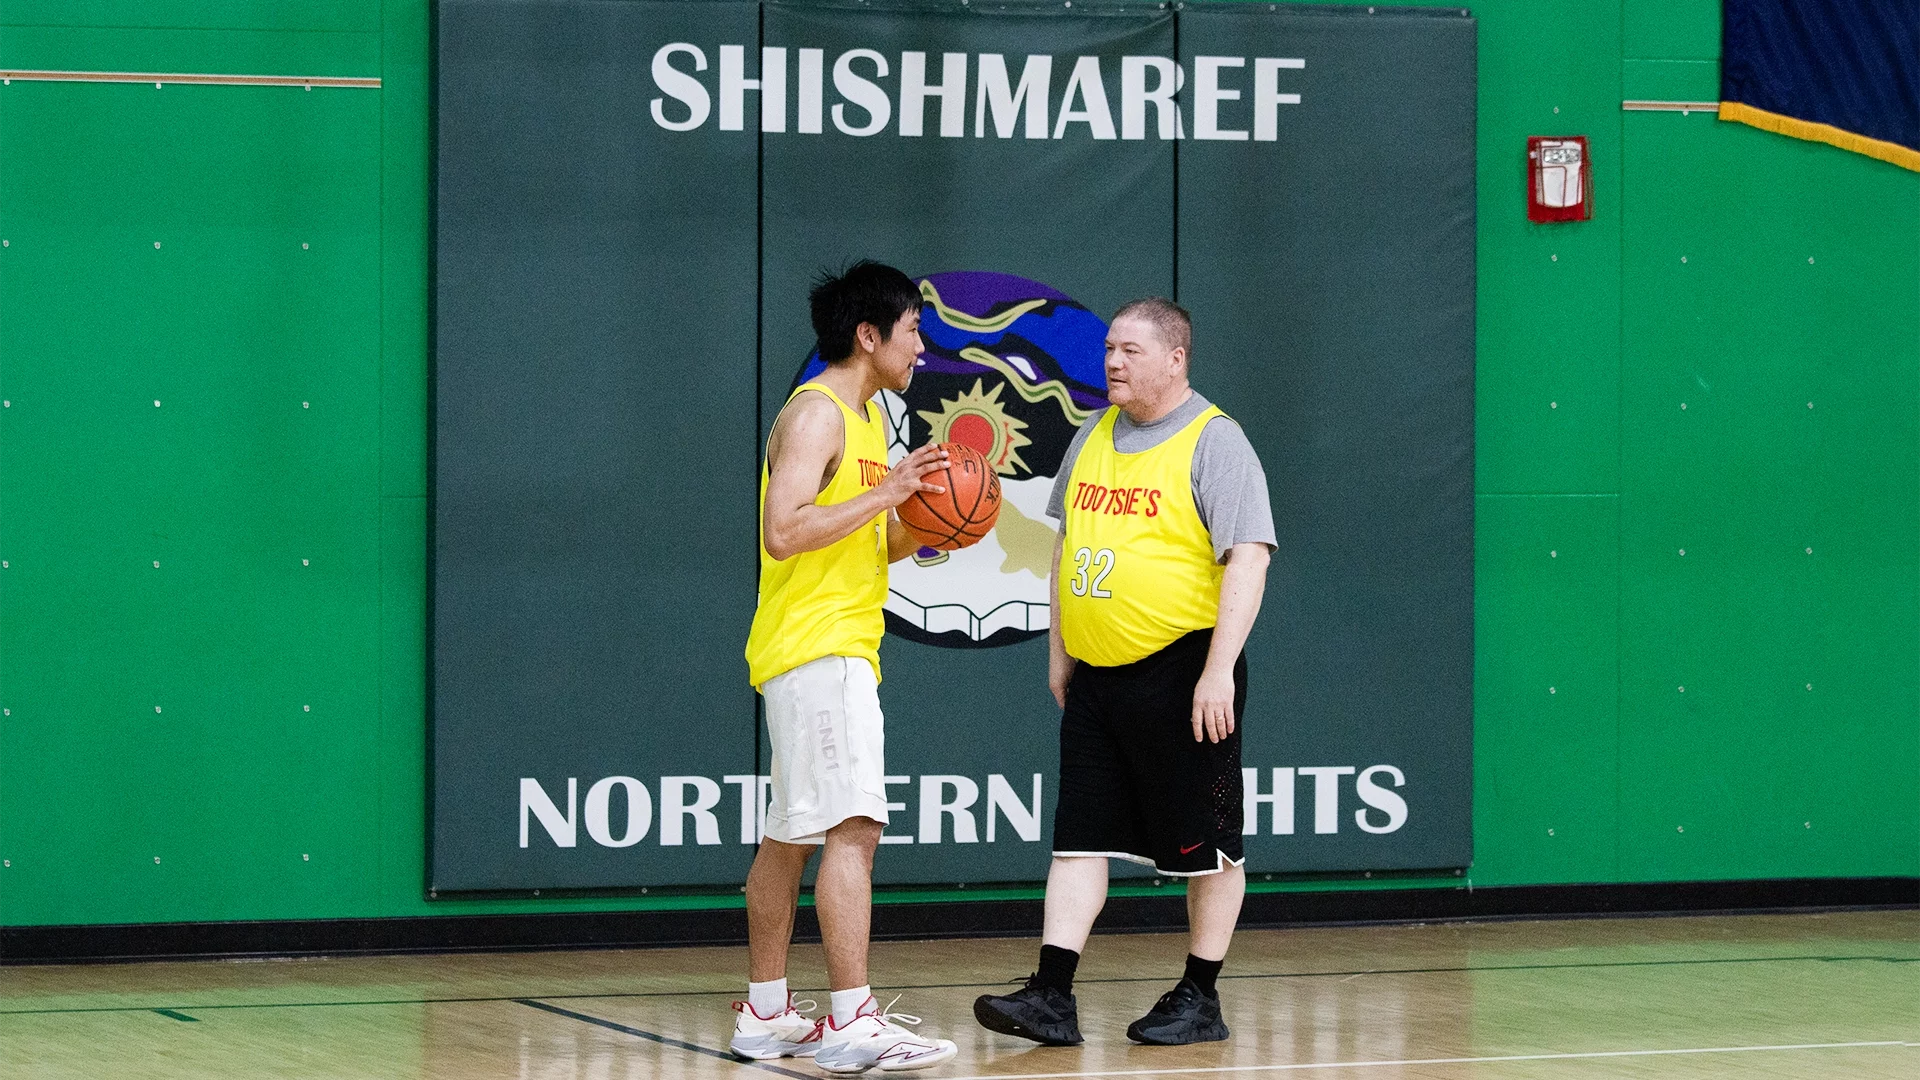 Adrian Pleasant and Shishmaref School Science Teacher Ken Stenek exchange words at halftime of a semifinal game at the Spring Carnival. Ben Townsend photo.